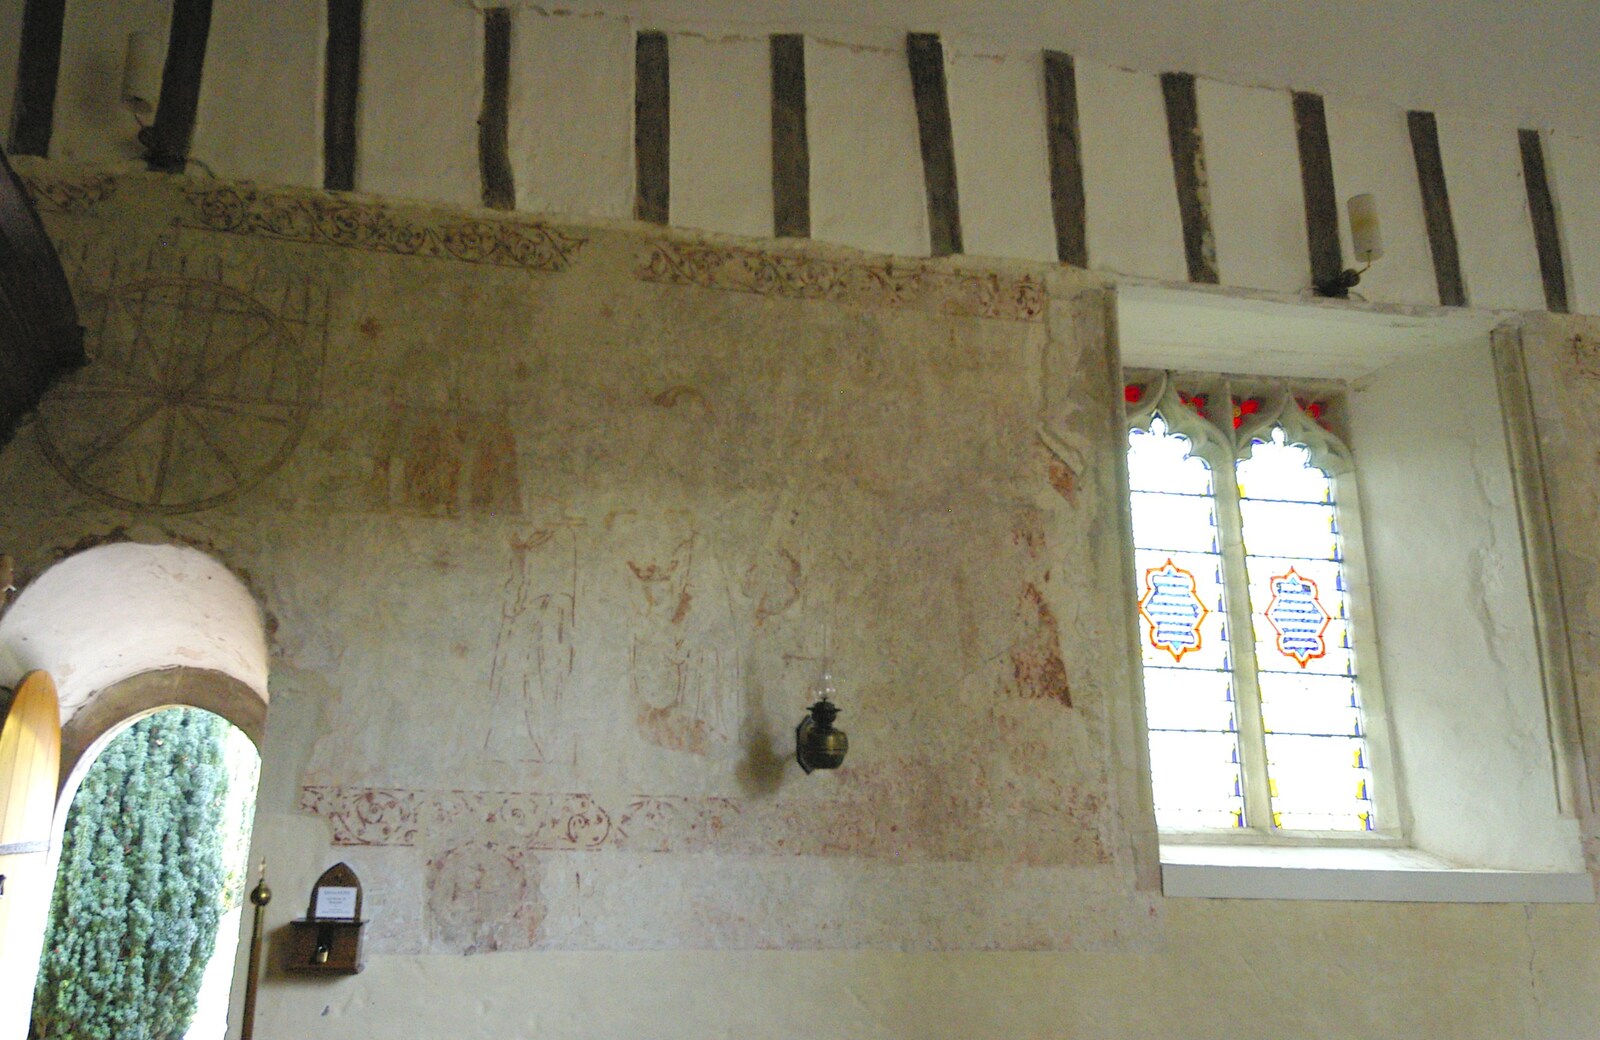 Mediaeval wall paintings inside the church from Thornham Walled Garden, and Bob Last Leaves the Lab, Cambridge - 20th November 2005